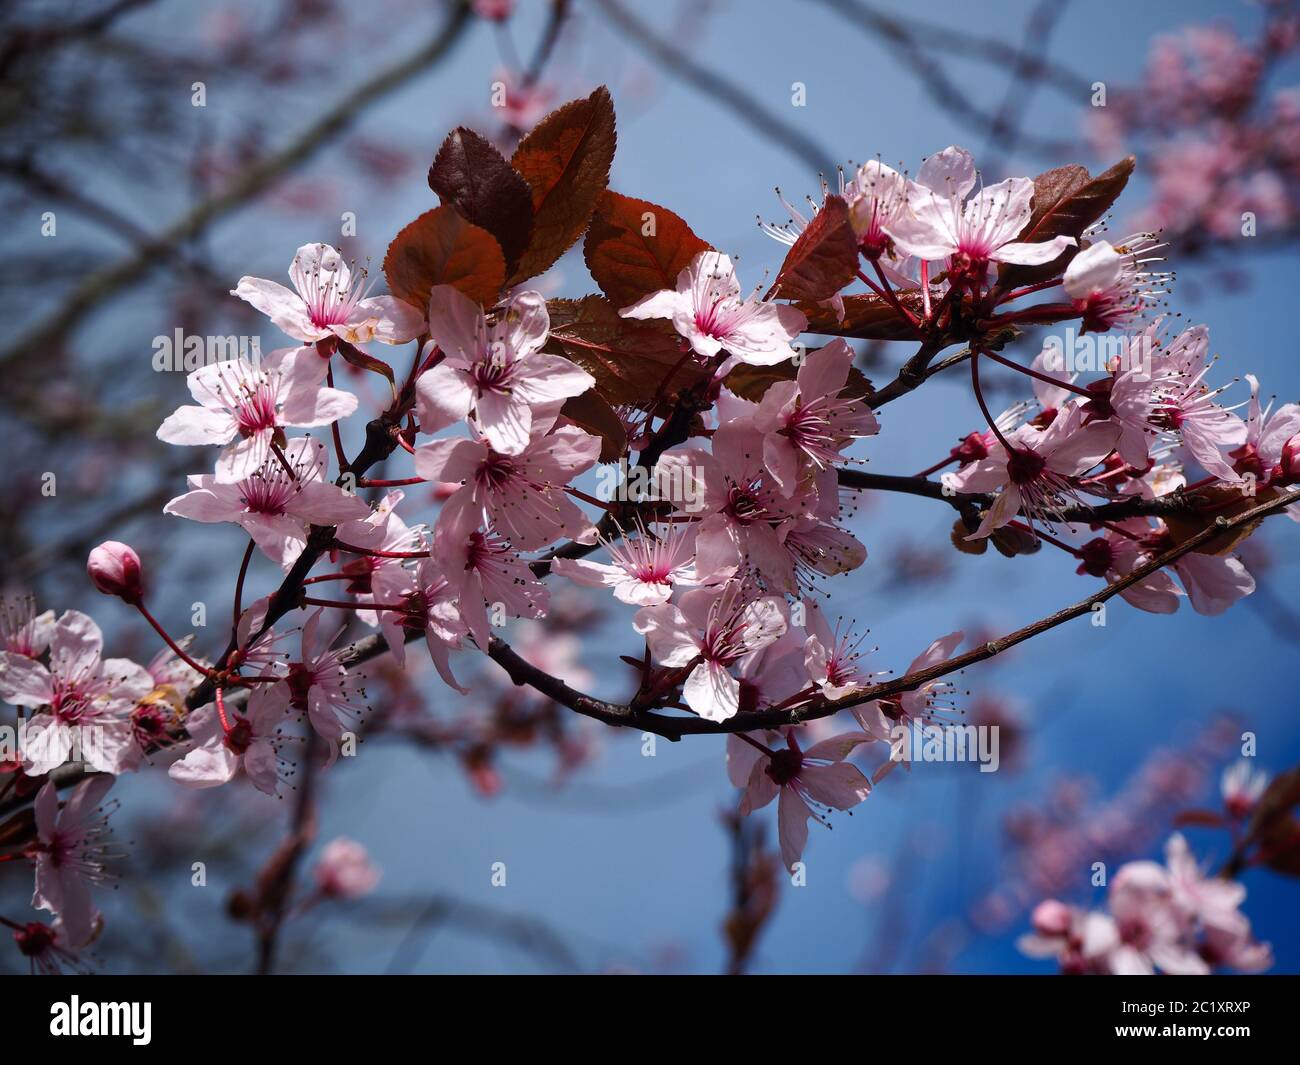 Closeup of pink cherry blossom in spring with a blue sky background Stock Photo